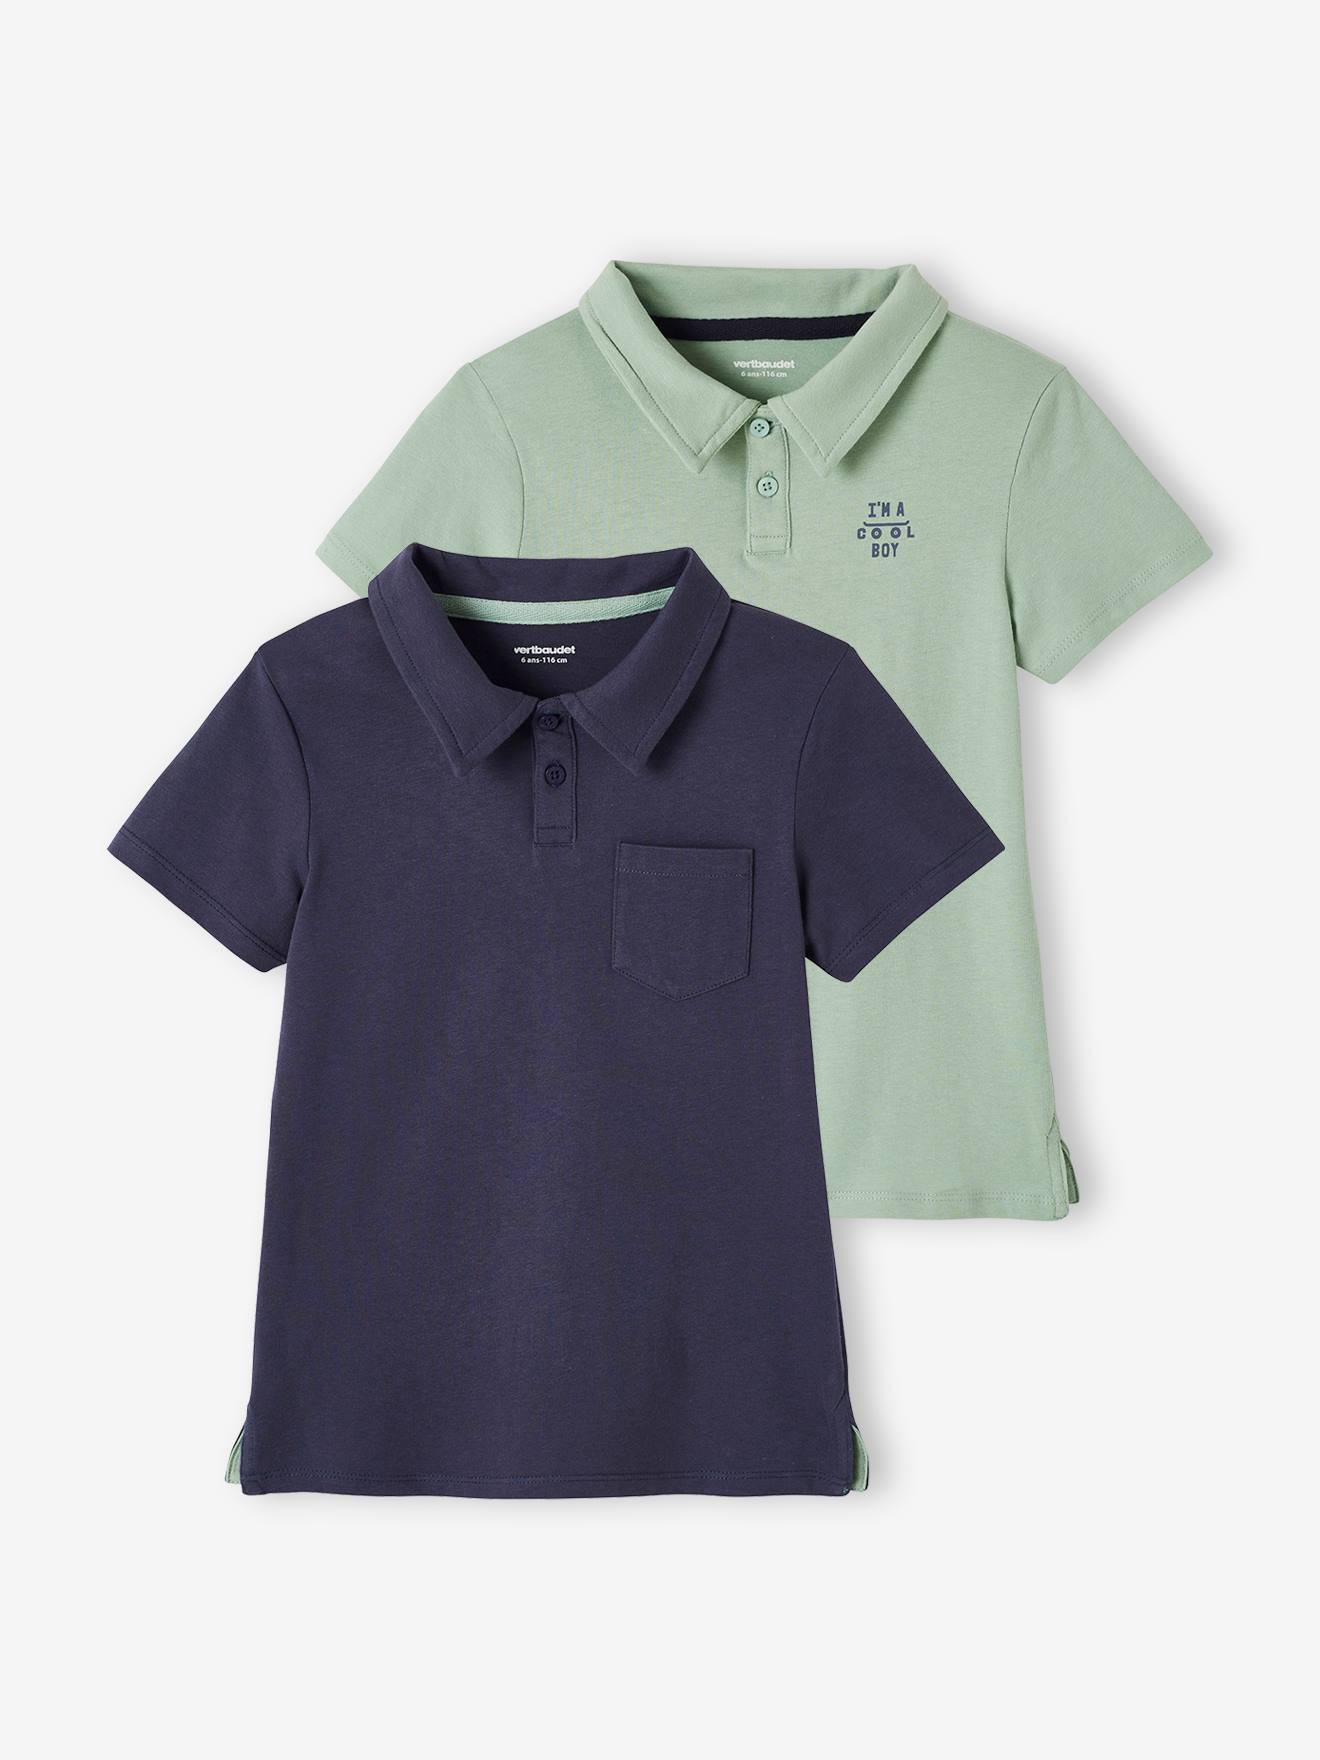 Set of 2 Plain, Short Sleeve Polo Shirts, for Boys blue light solid with design